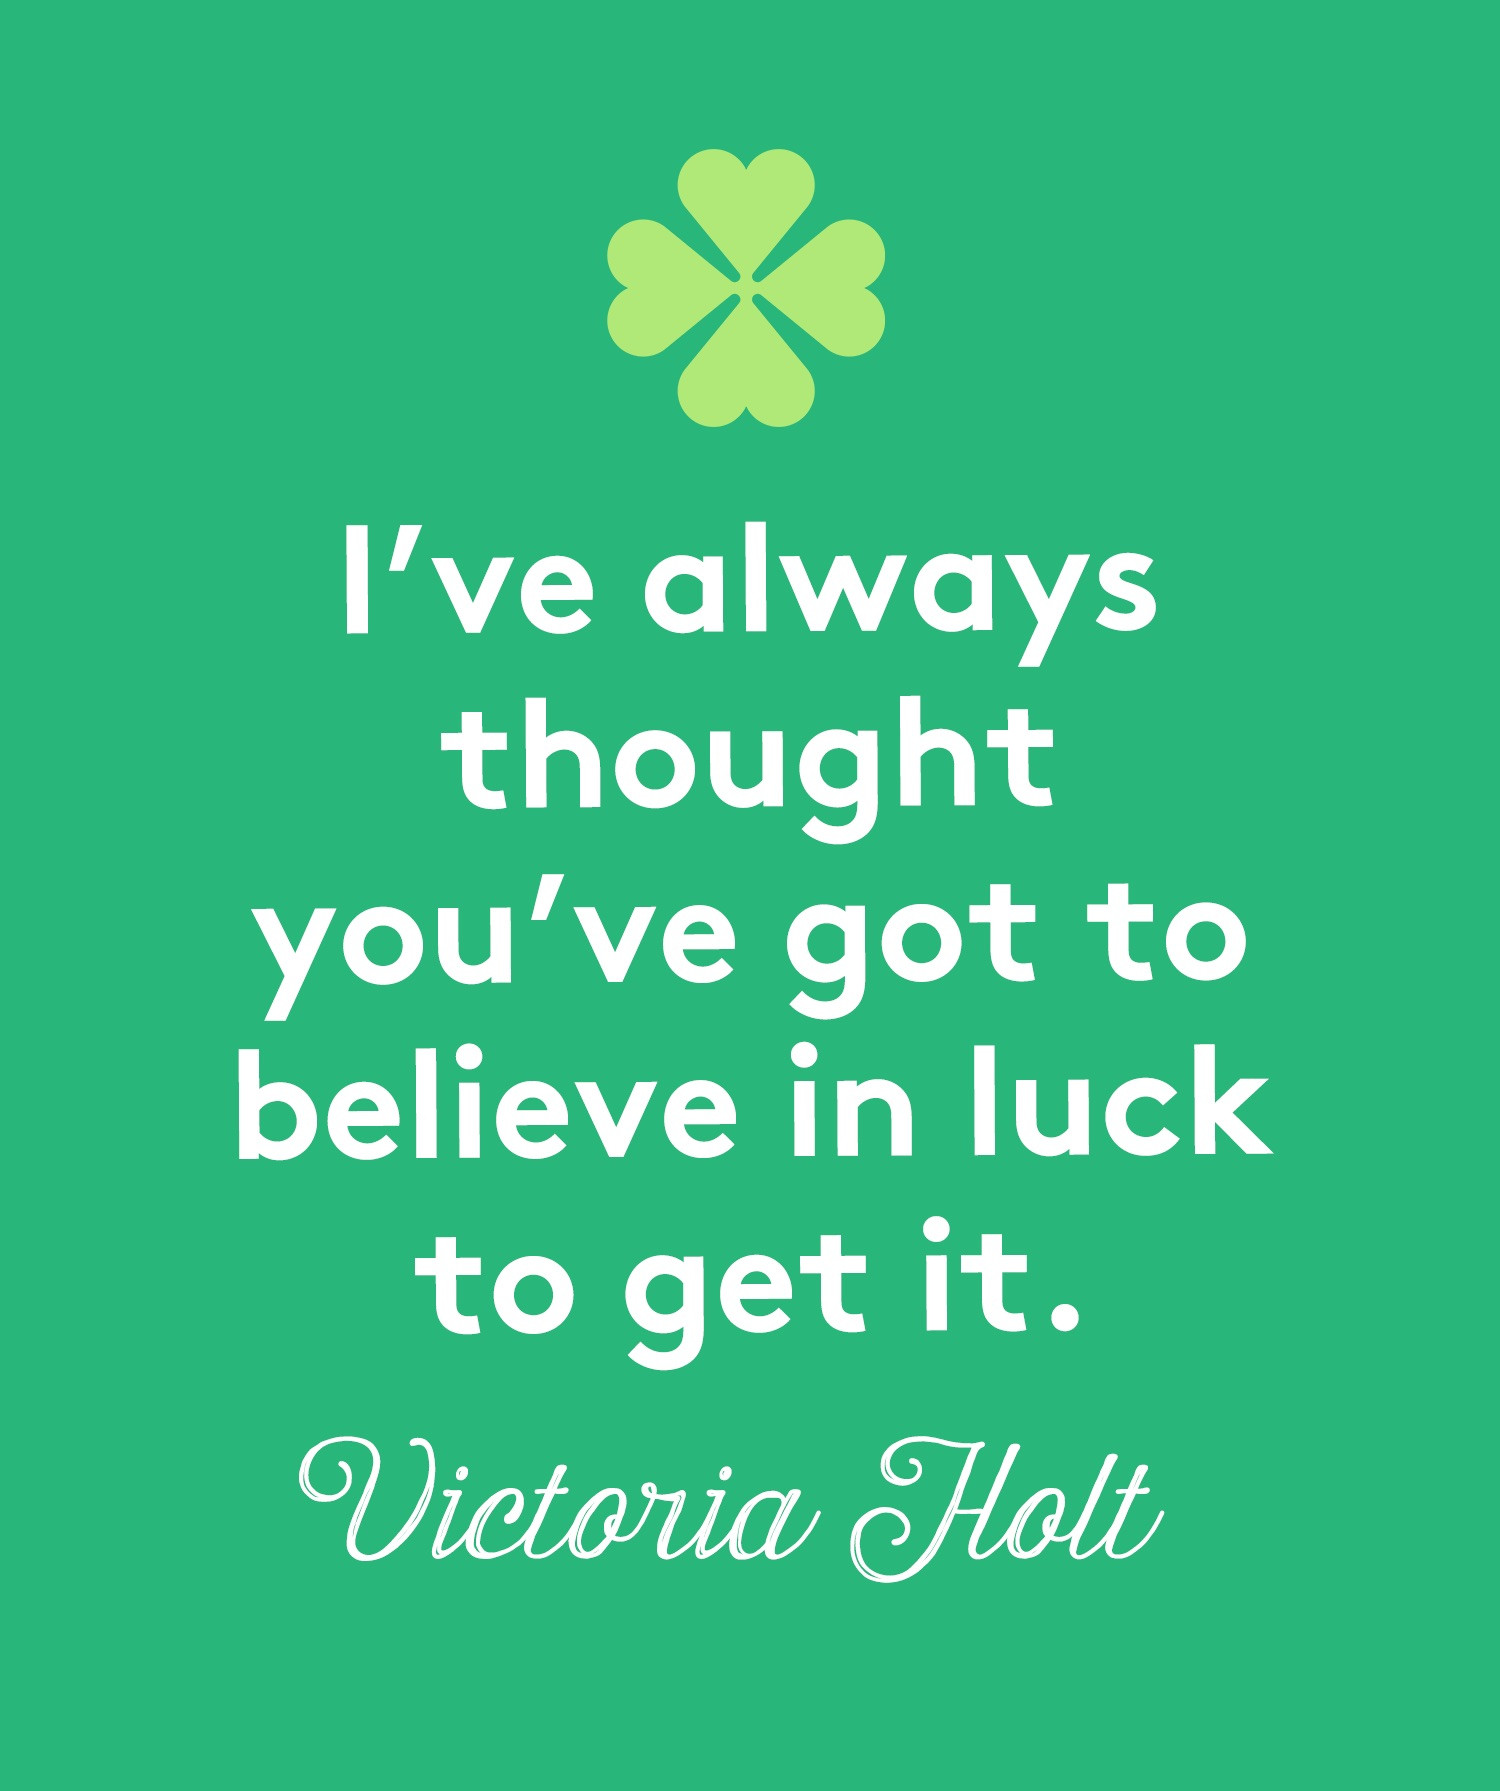 St Patrick Day Quotes
 9 St Patrick’s Day Memes and Quotes You’ll Send to